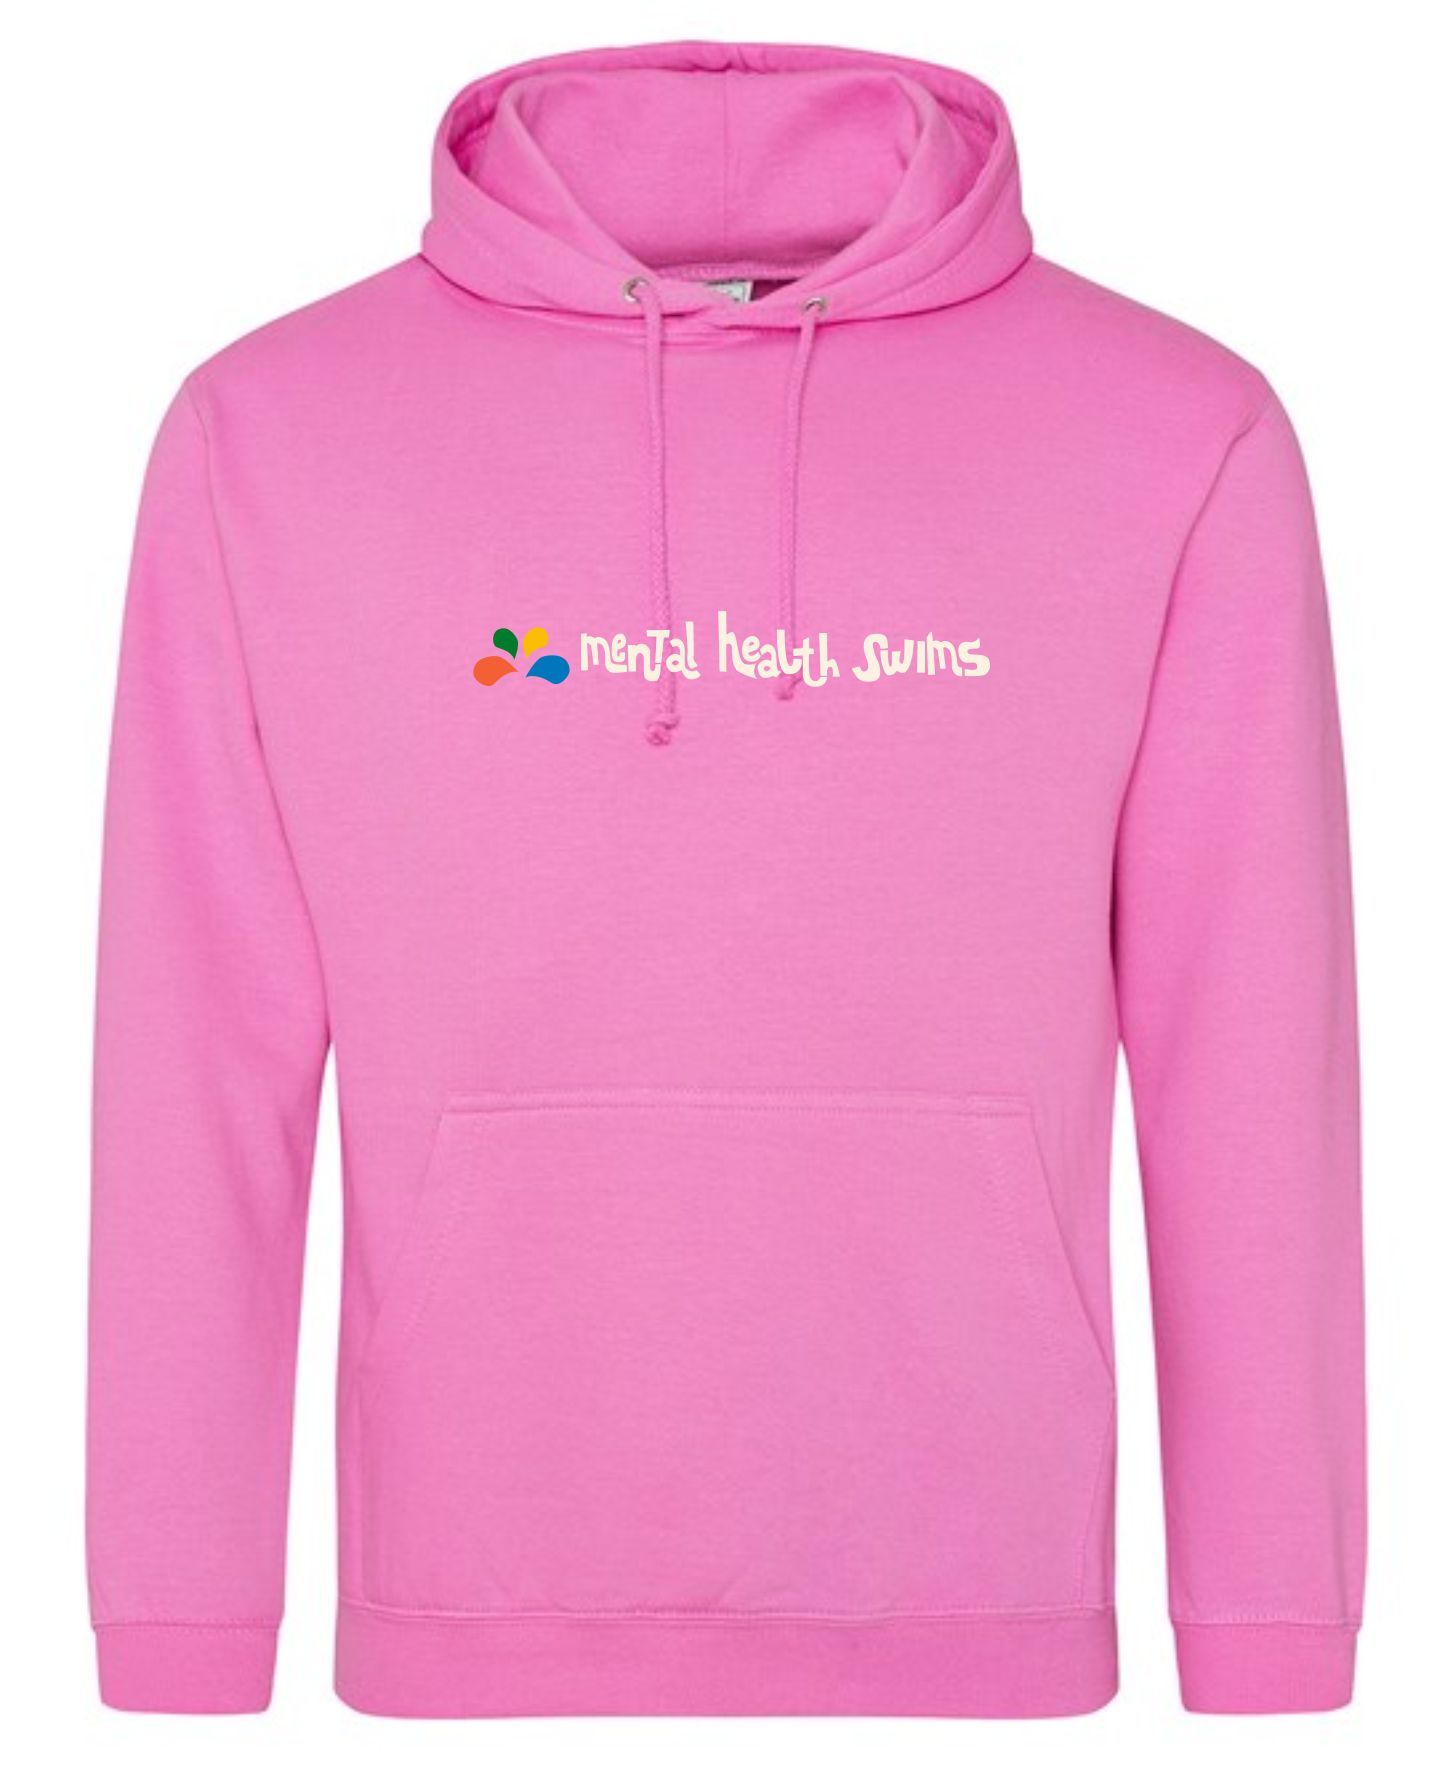 Mental Health Swims- 'Text in a line with splashes' Candyfloss Pink Hoodie (Unisex)